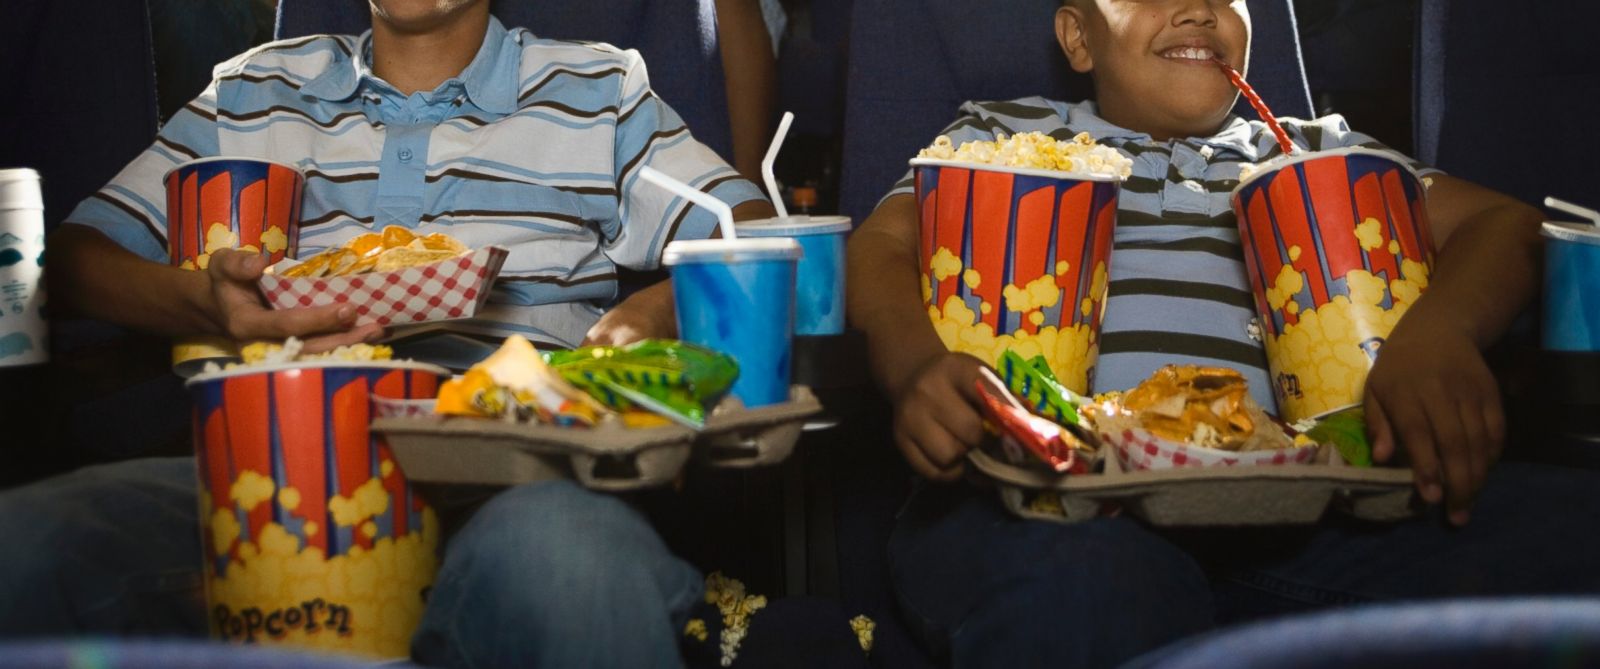 Movie Theaters Going Gourmet With New, More Upscale Food Offerings